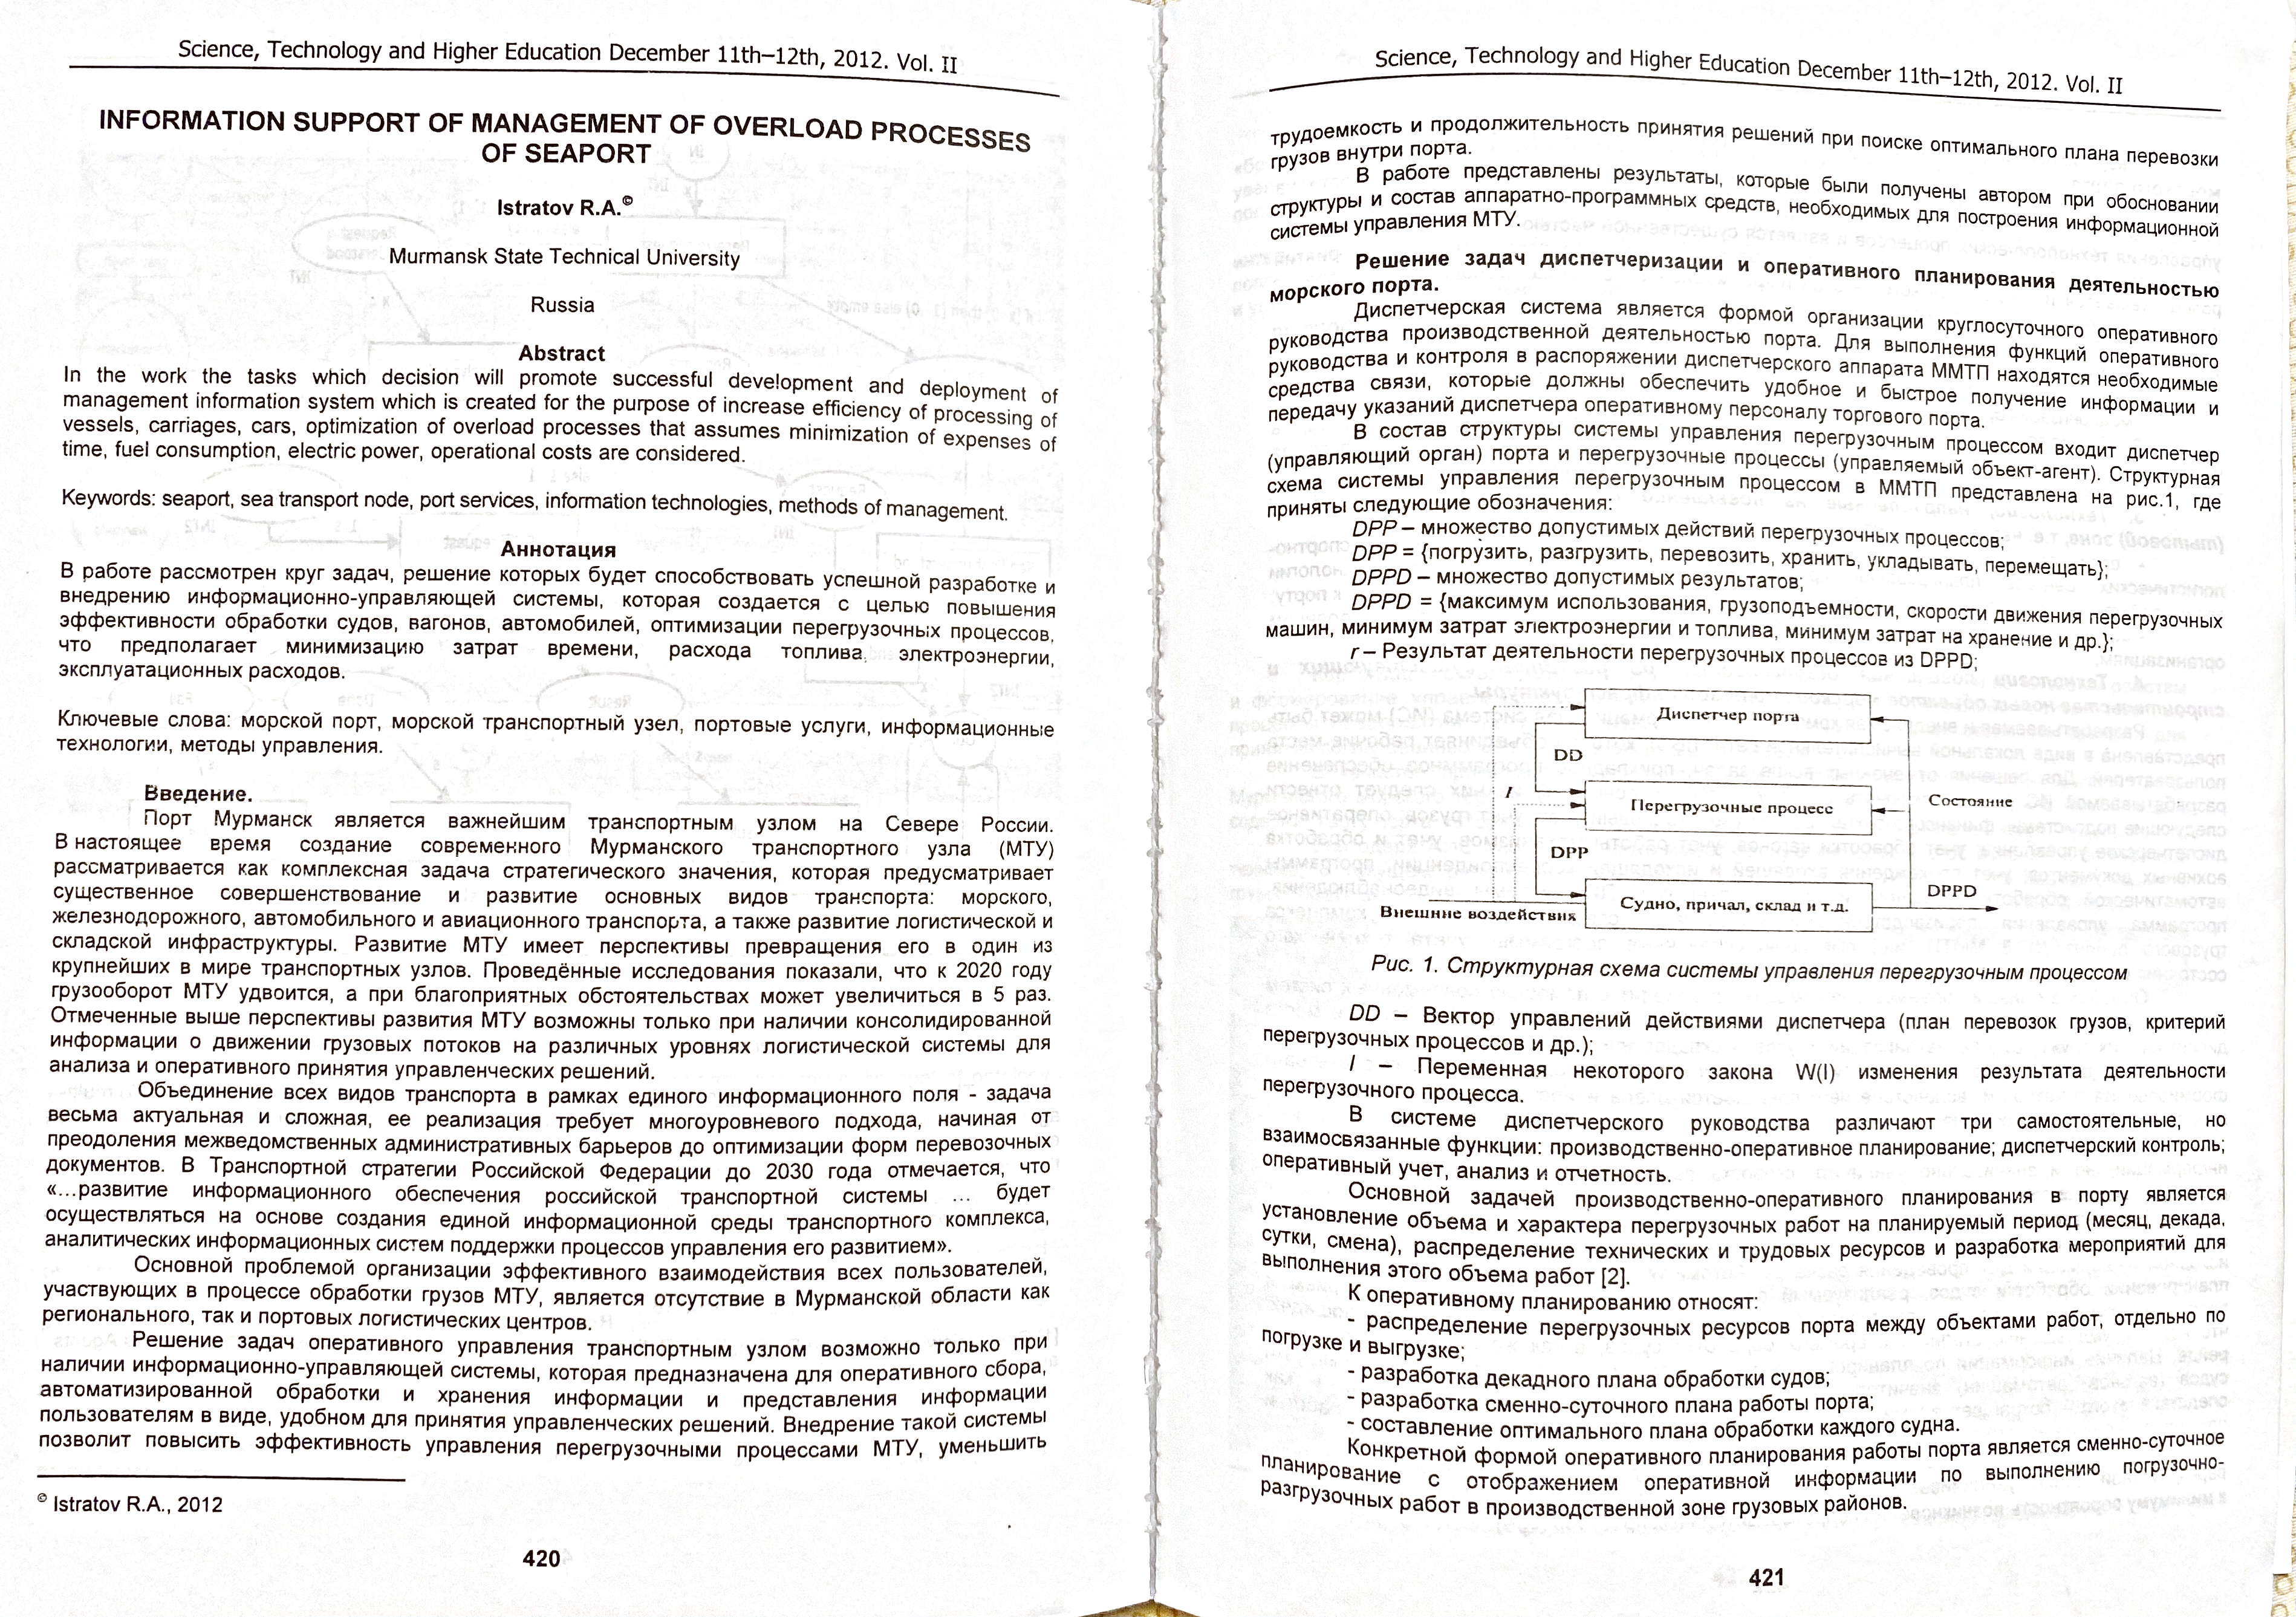 <p>INFORMATION SUPPORT OF MANAGEMENT OF OVERLOAD PROCESSES OF SEAPORT</p><p>Istratov Roman A. - Ph.D. student of Murmansk State technical university, Murmansk, Russsia.</p>